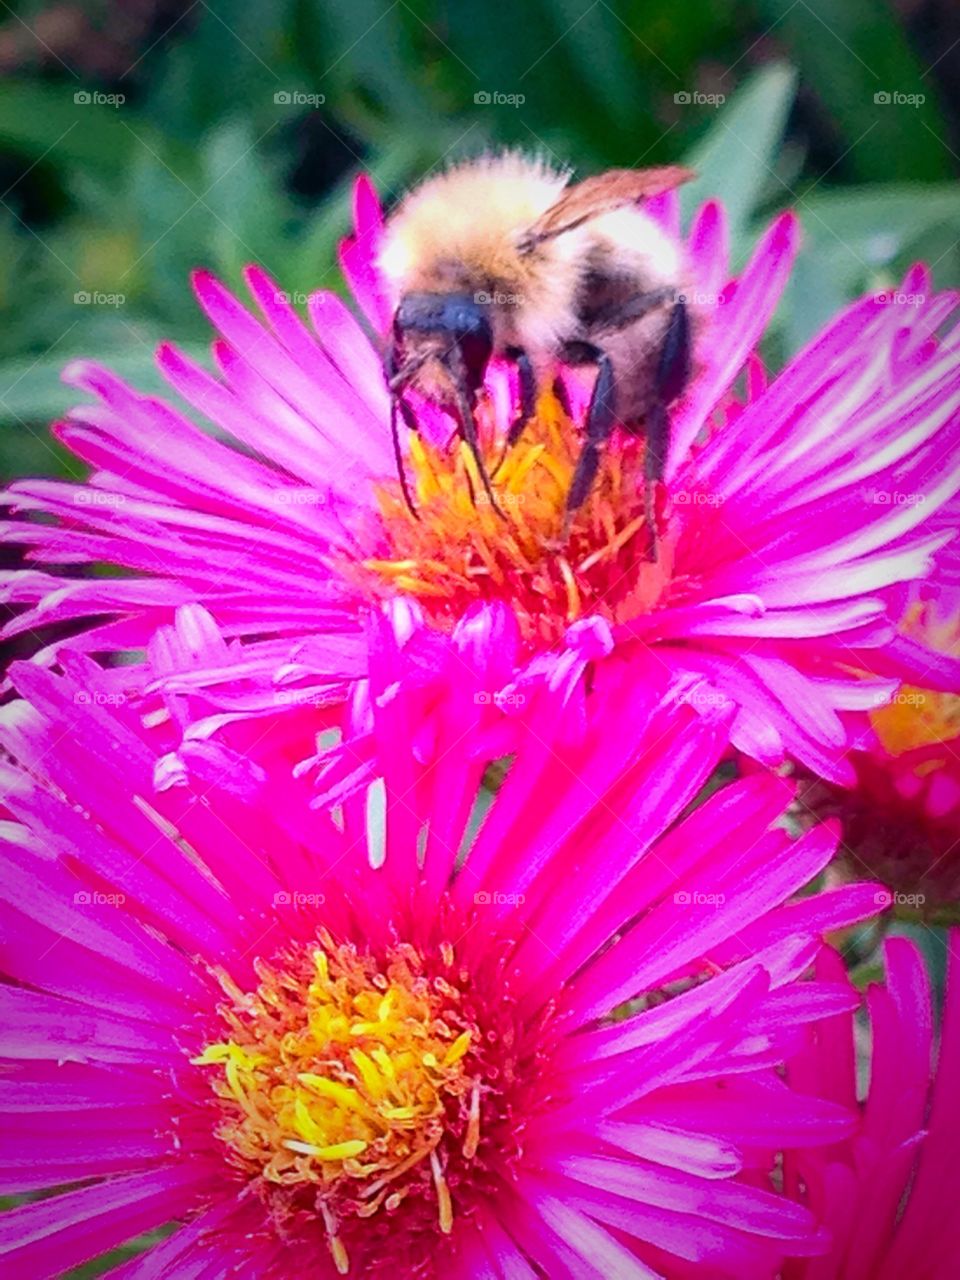 White dense hairy body bumblebee in England collecting pollen on a pink flower 